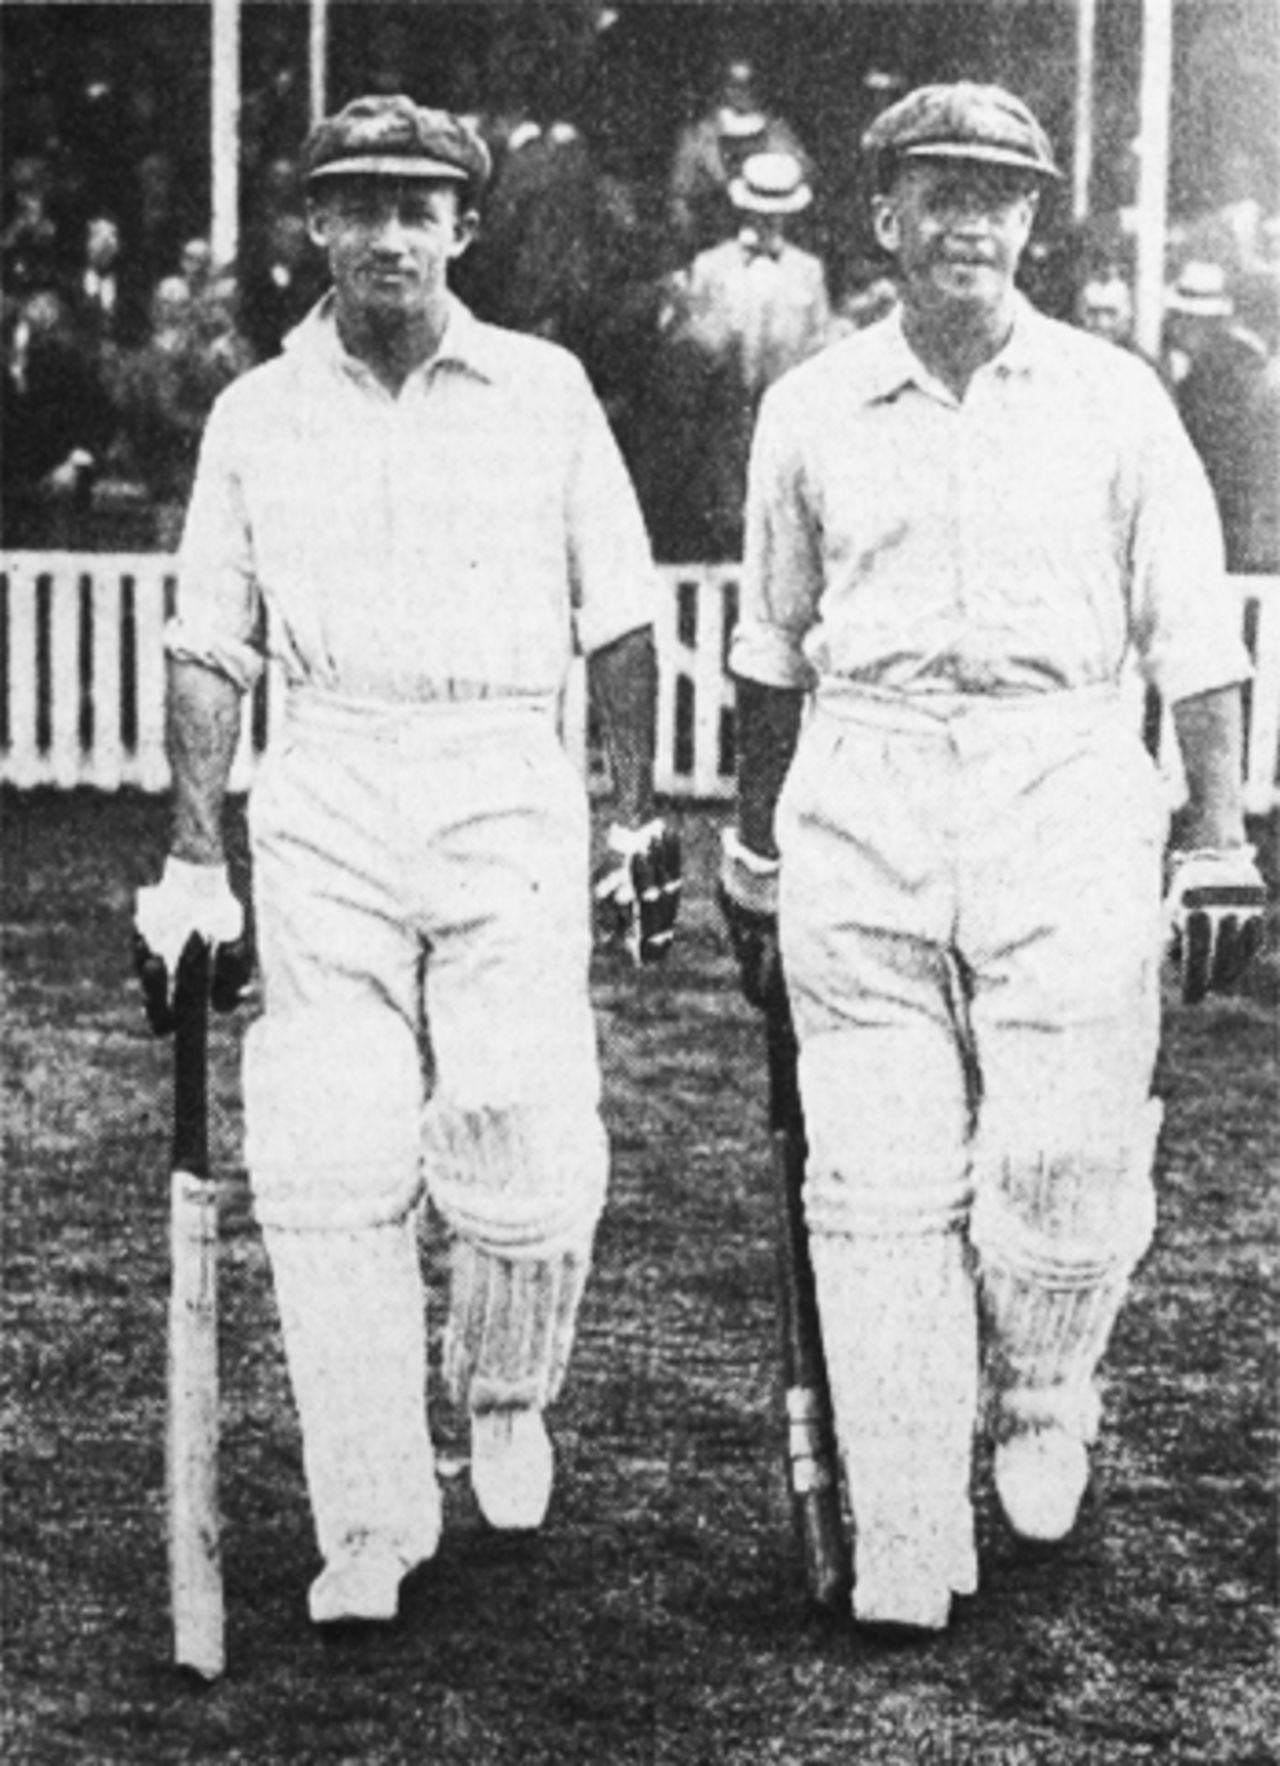 Don Bradman and Bill Ponsford resume batting during a stand of 451, England v Australia, The Oval, 1934